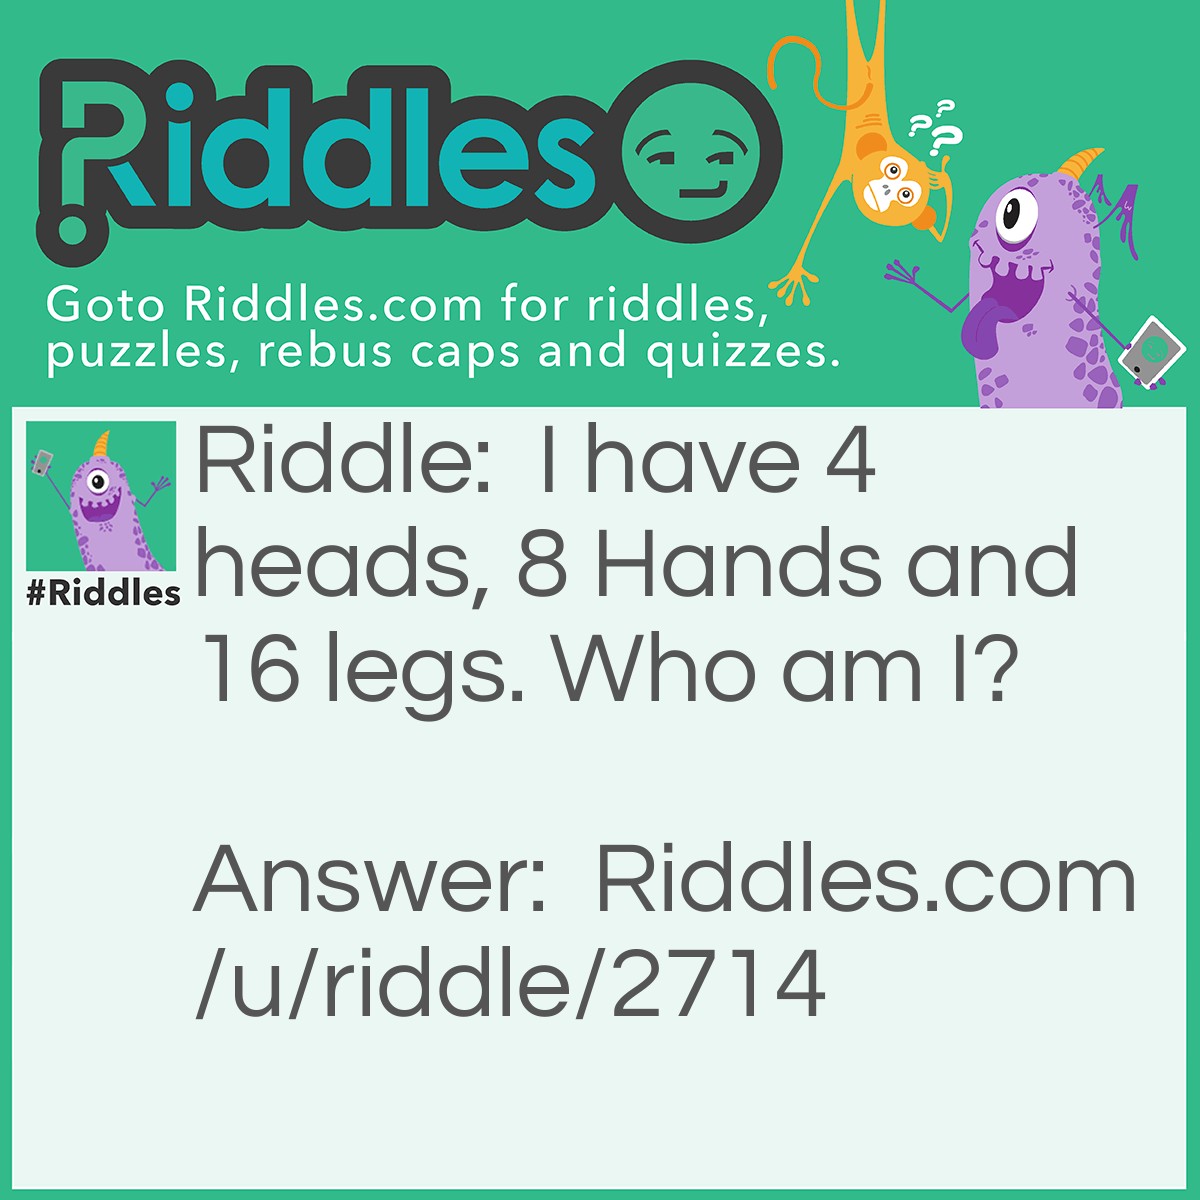 Riddle: I have 4 heads, 8 Hands and 16 legs. Who am I? Answer: a big Liar!